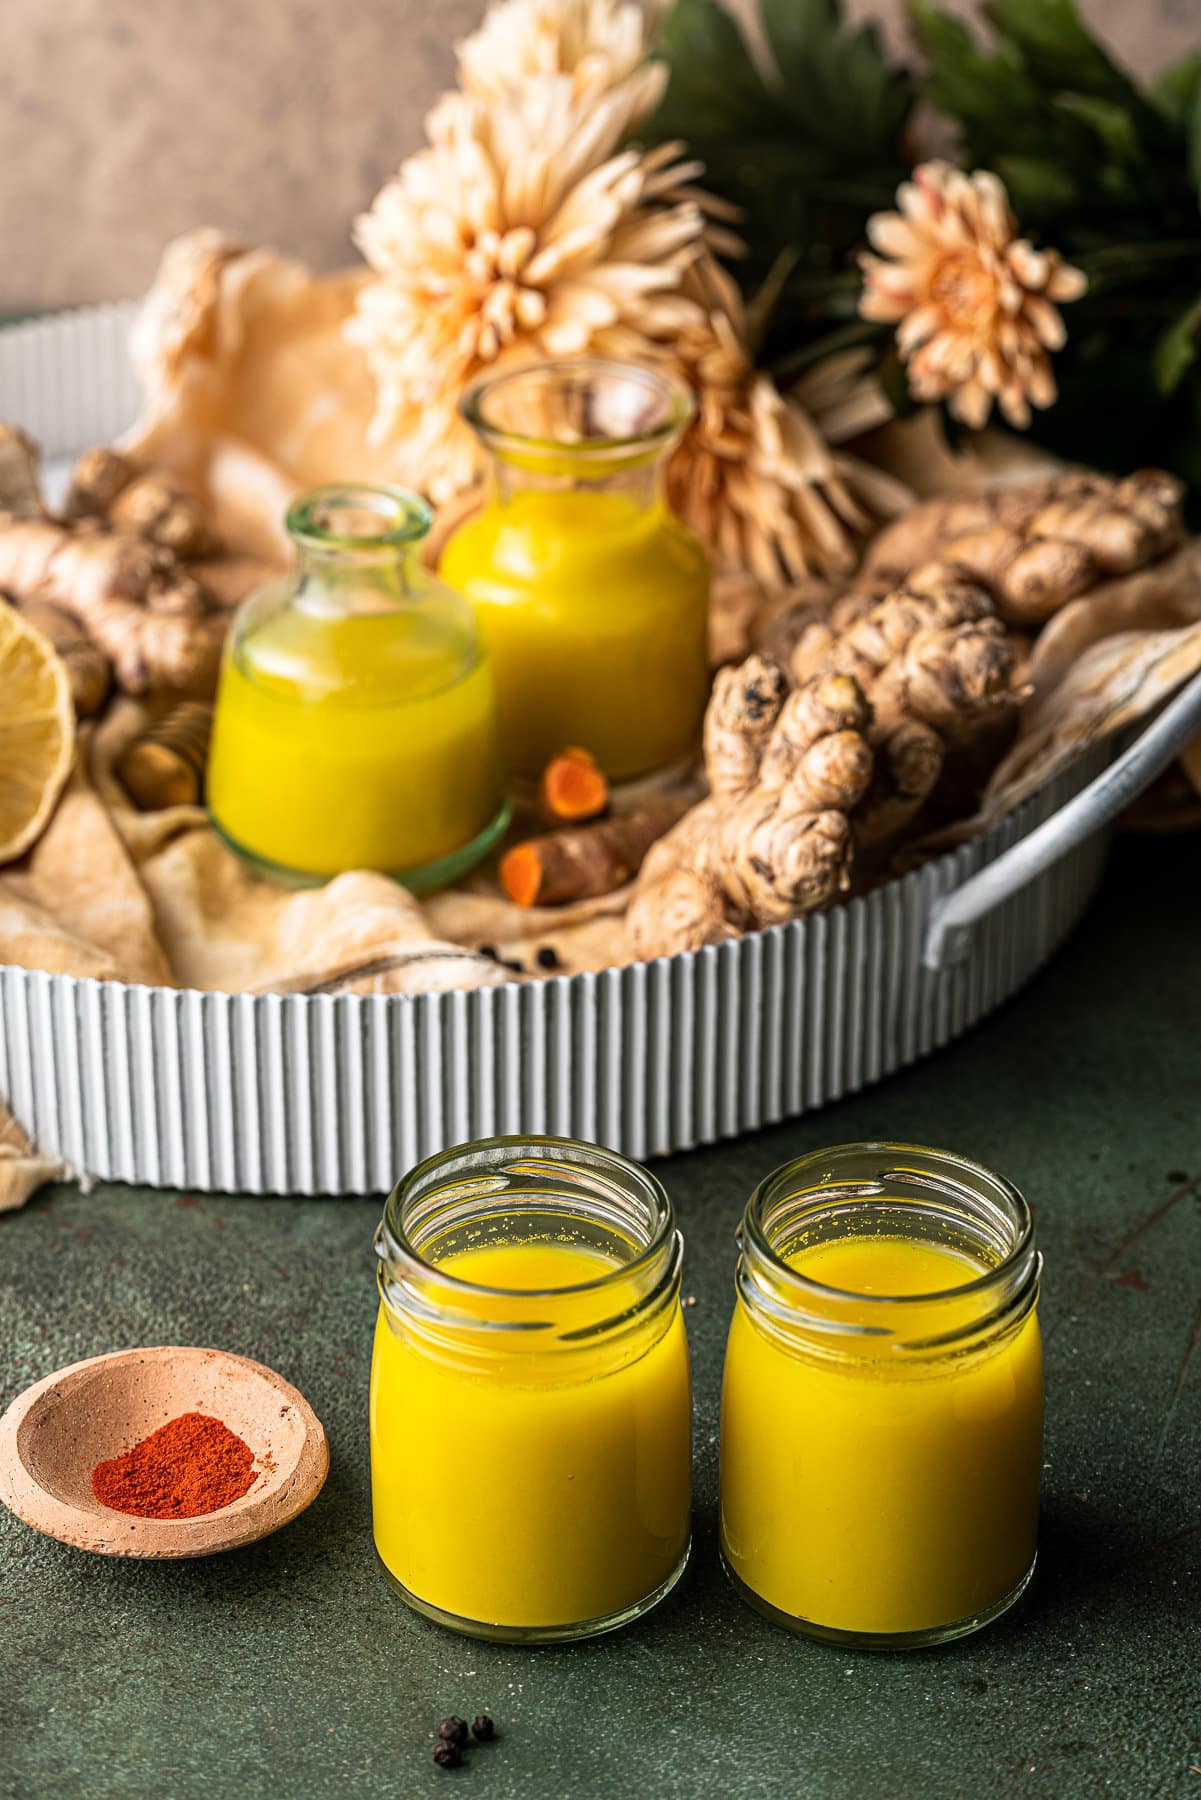 Four shots of ginger turmeric wellness shots with a tray full of the ingredients and flowers.